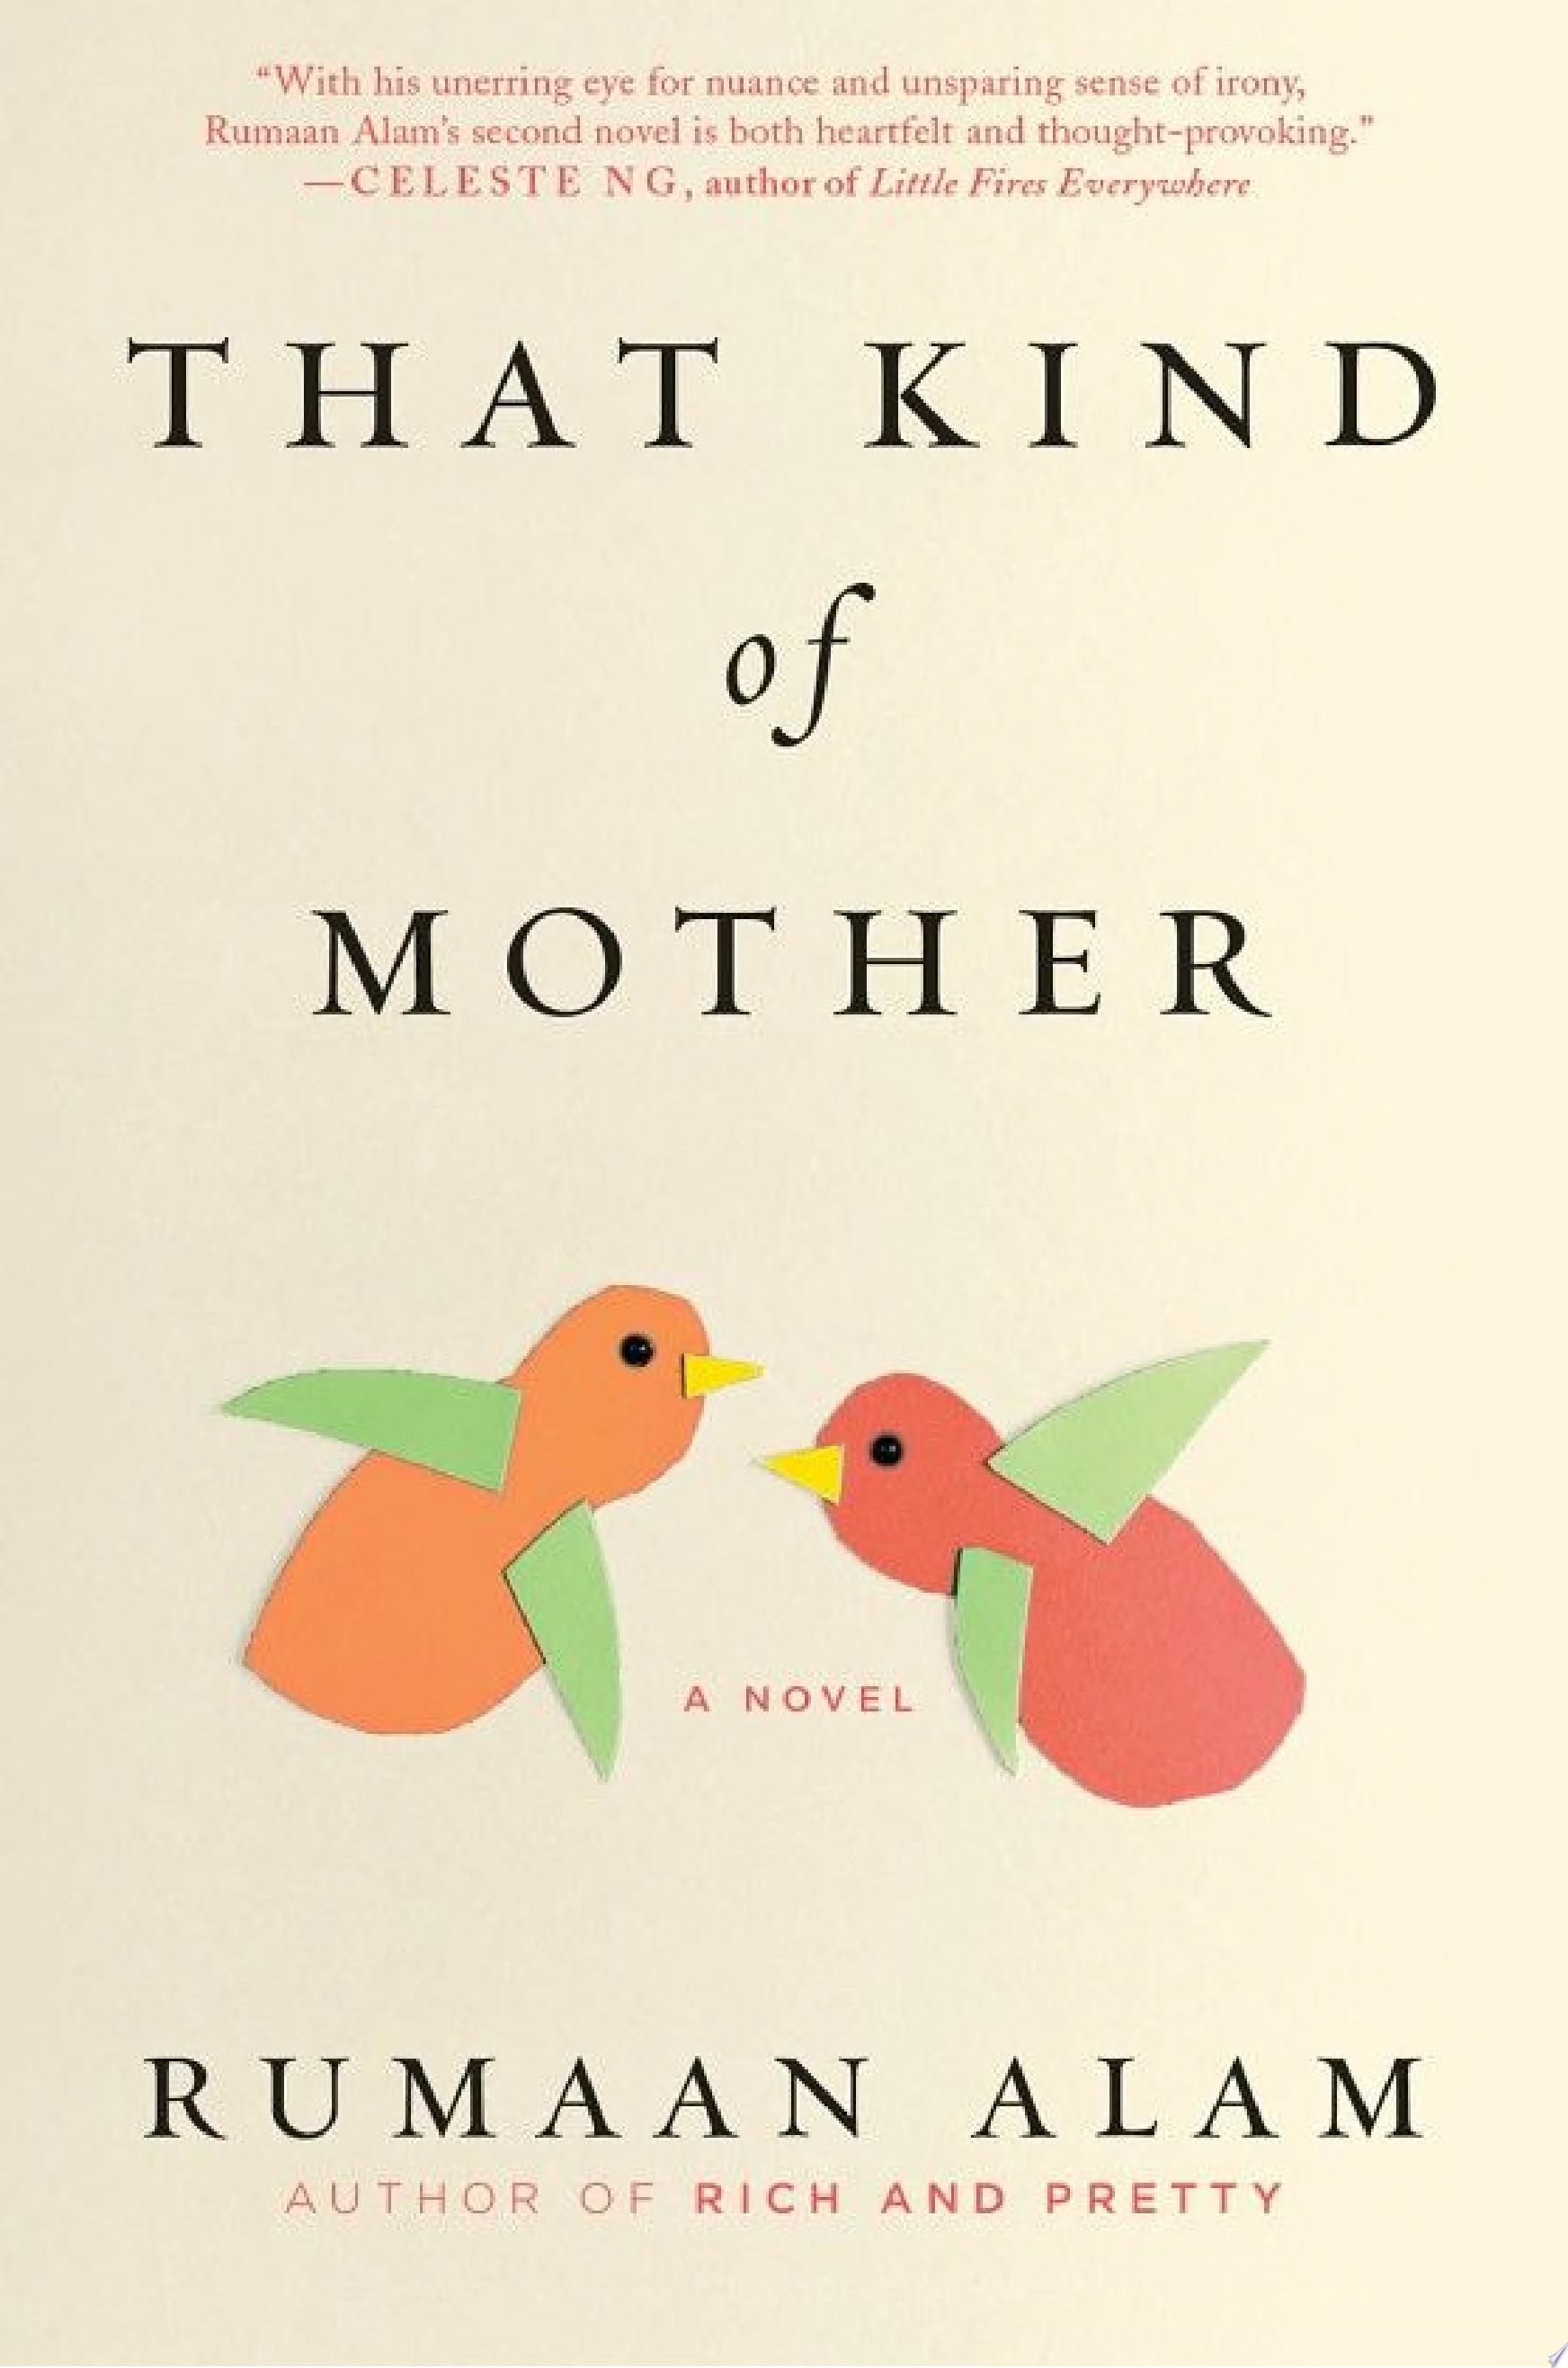 Image for "That Kind of Mother"